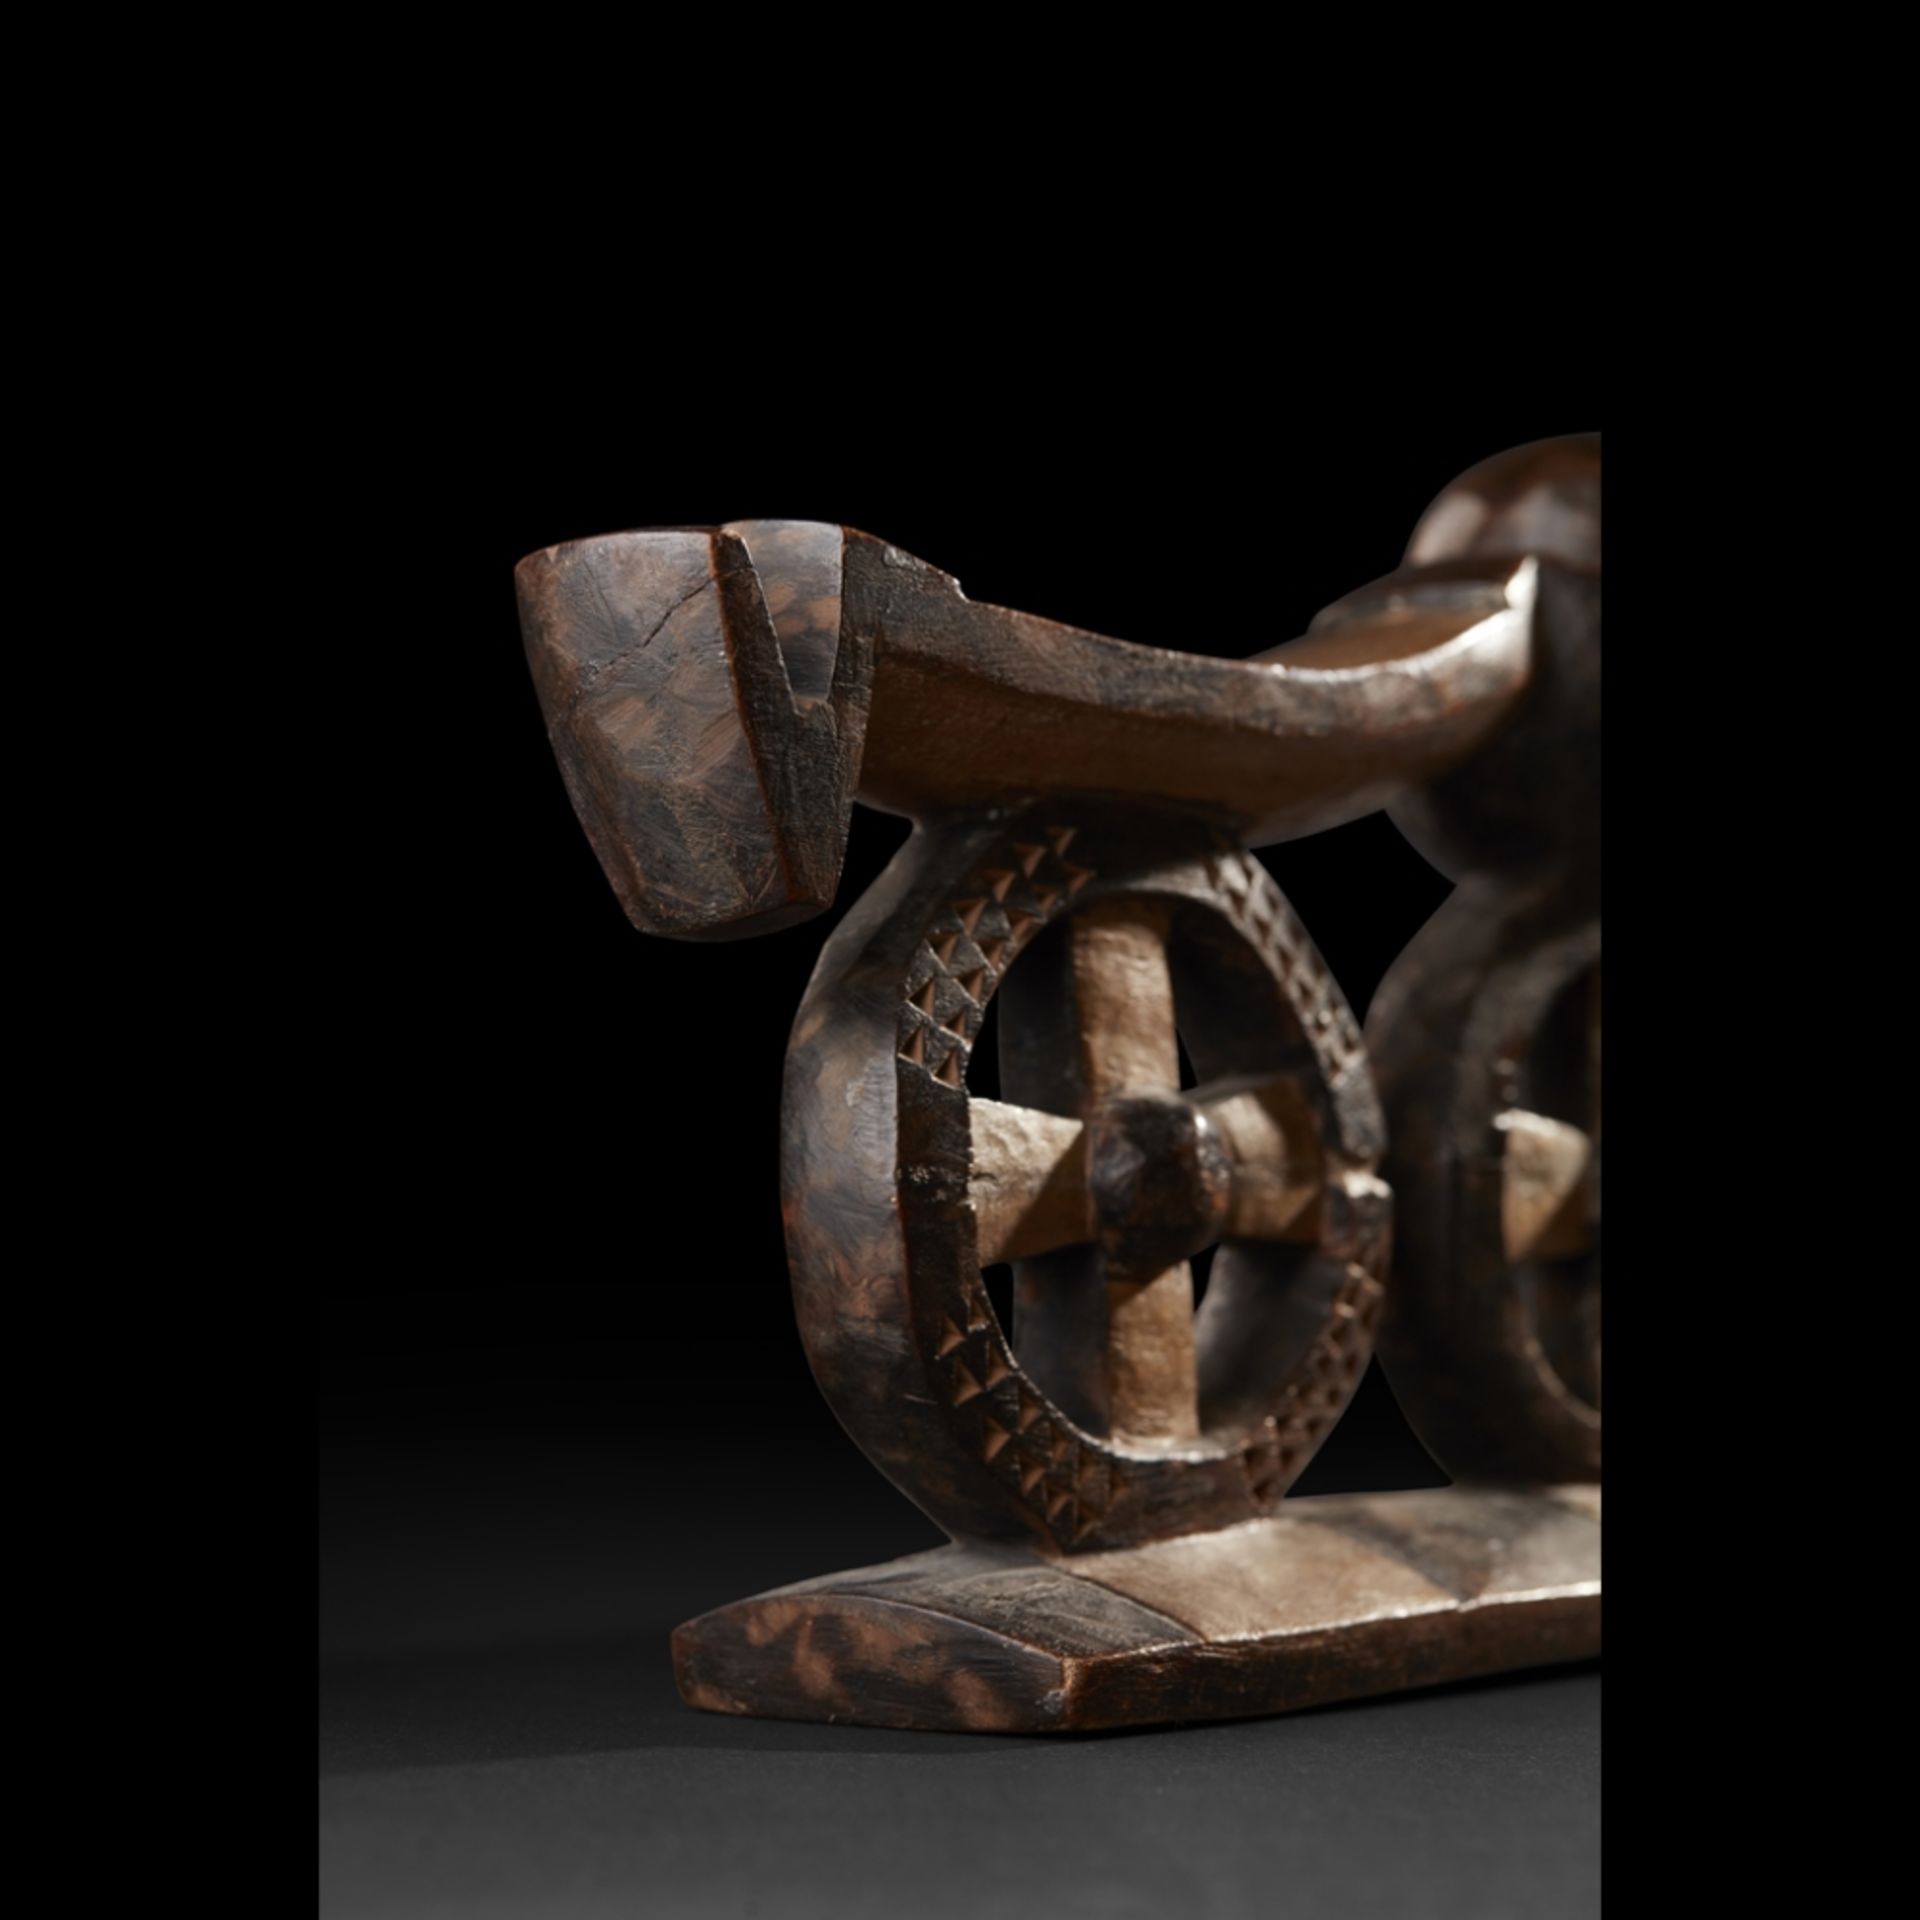 NORTH NGUNI NECKRESTSOUTH AFRICA carved wood and pokerwork, with dual neck supports seperated by a - Image 4 of 6